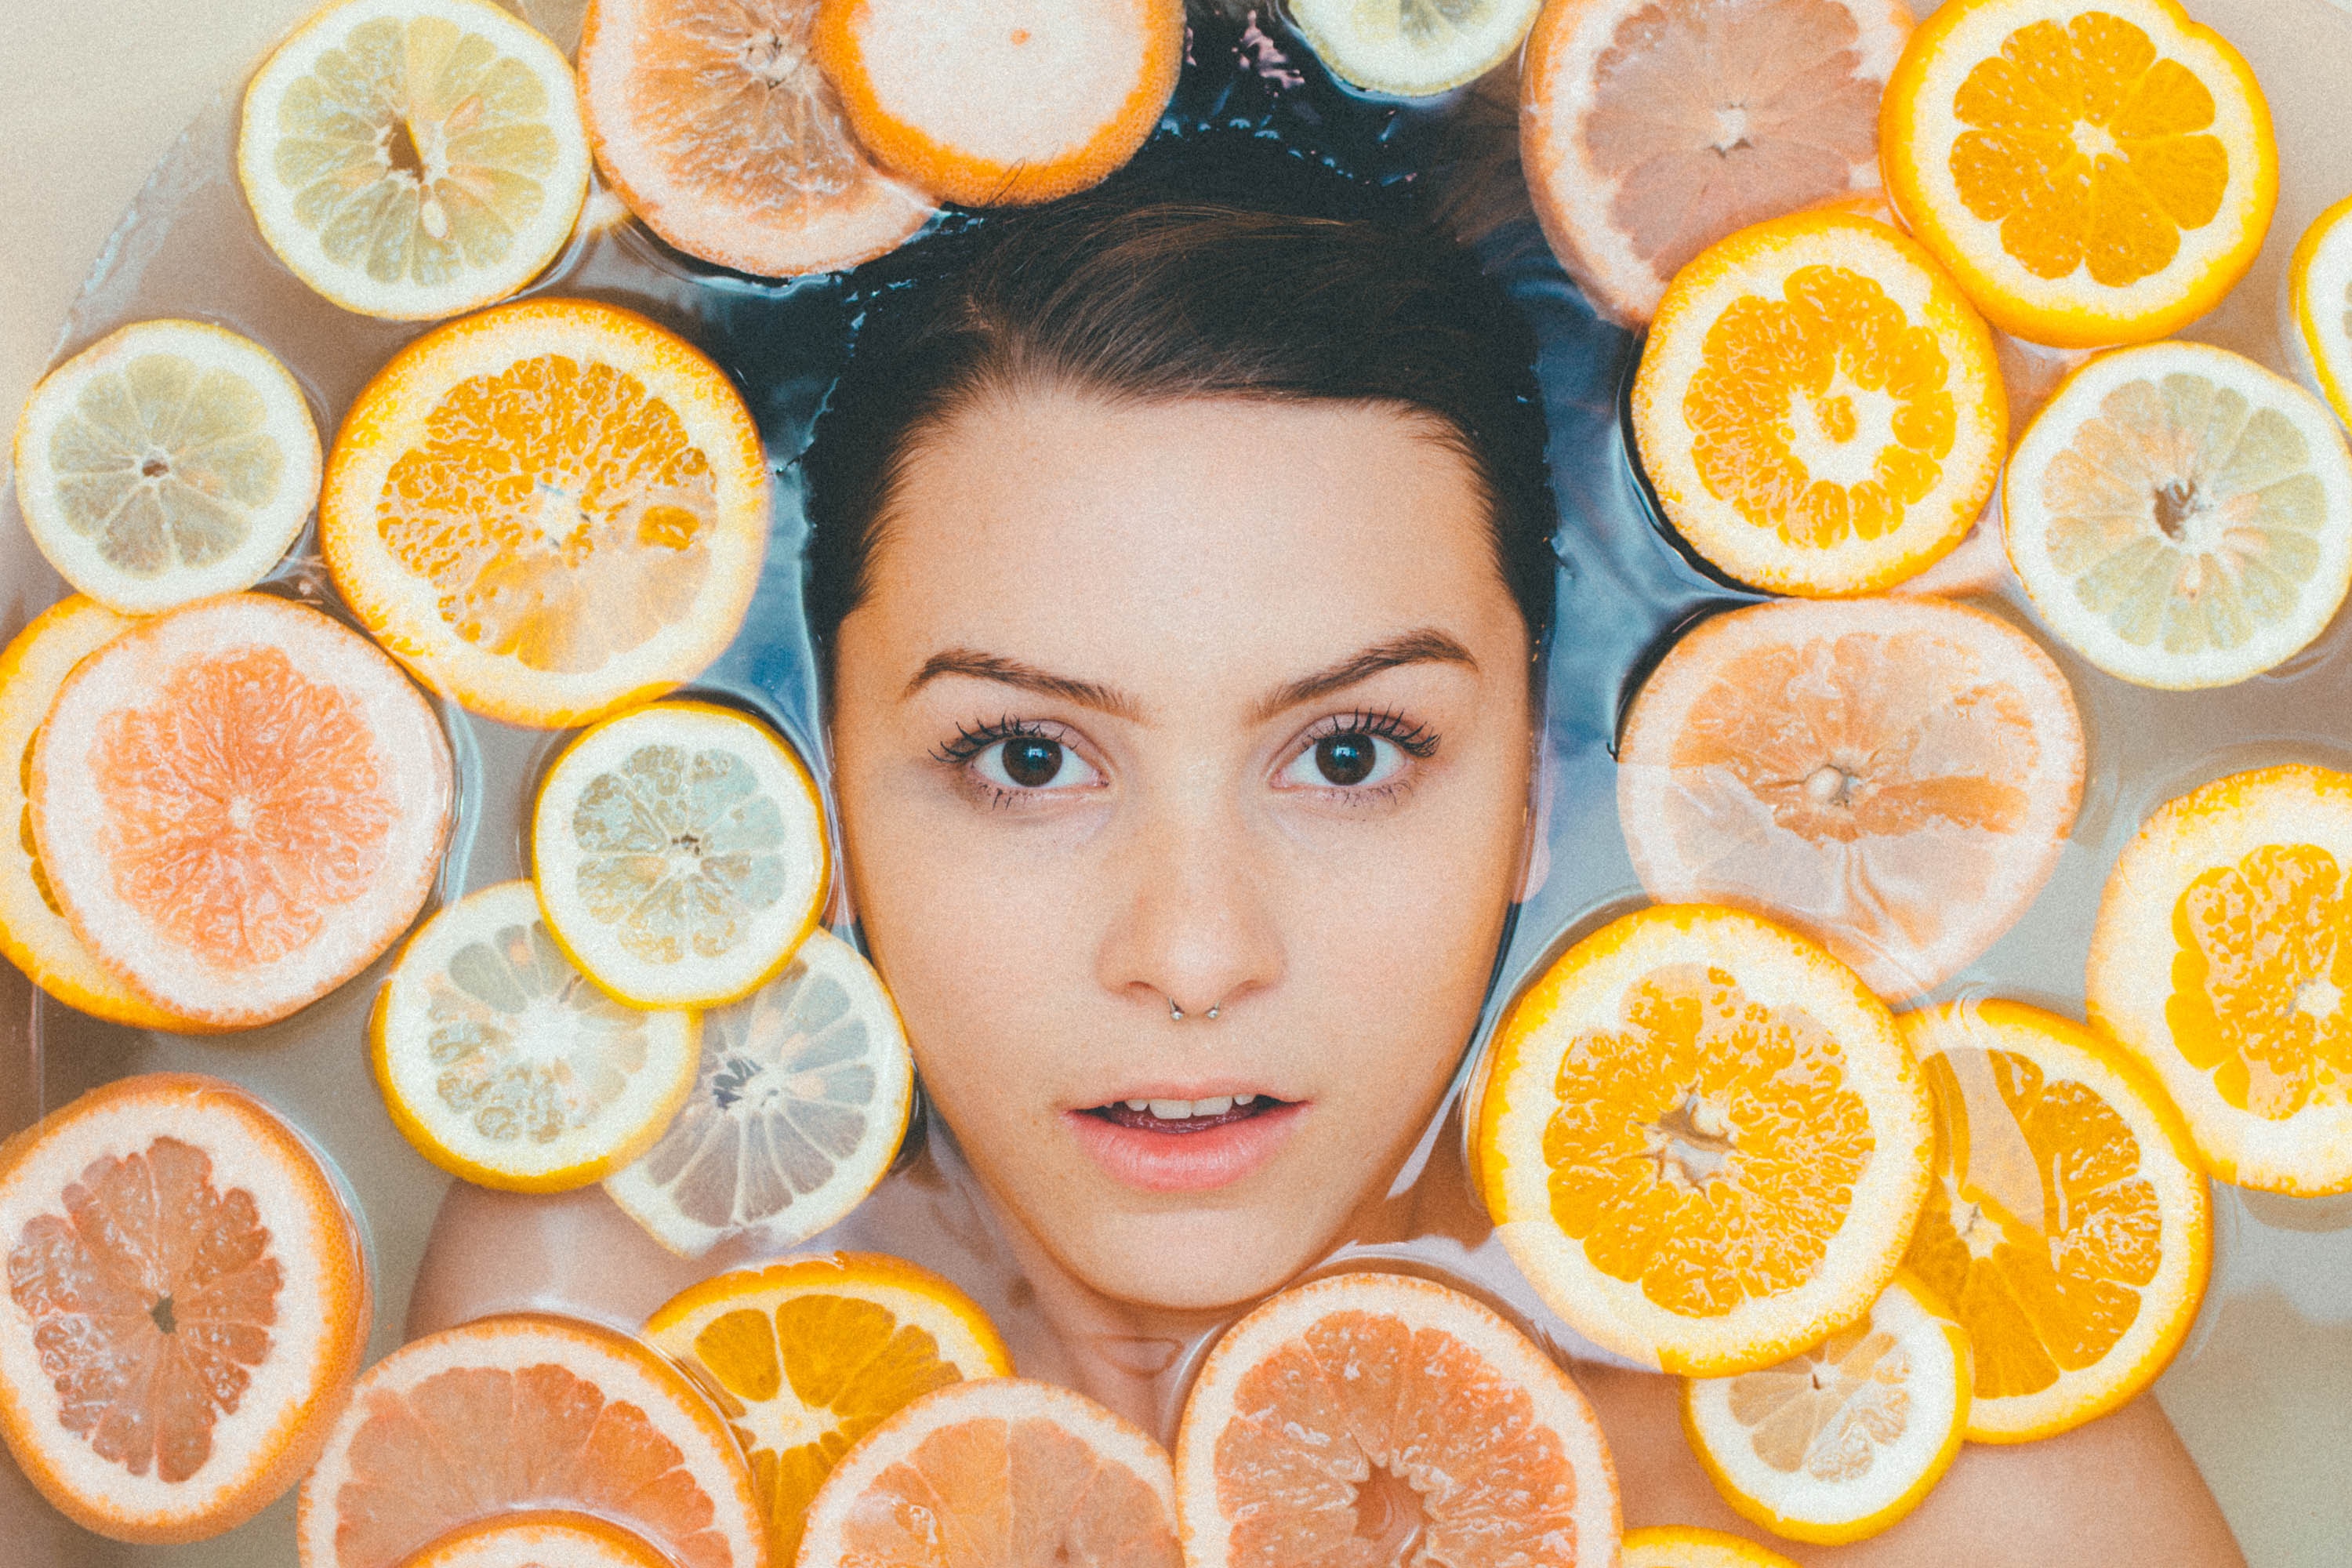 Quick, affordable and easy ways easy to reduce the toxins you encounter every day may be simpler than you think. Follow these tips to detox your daily beauty routine, and live a healthier and cleaner life.